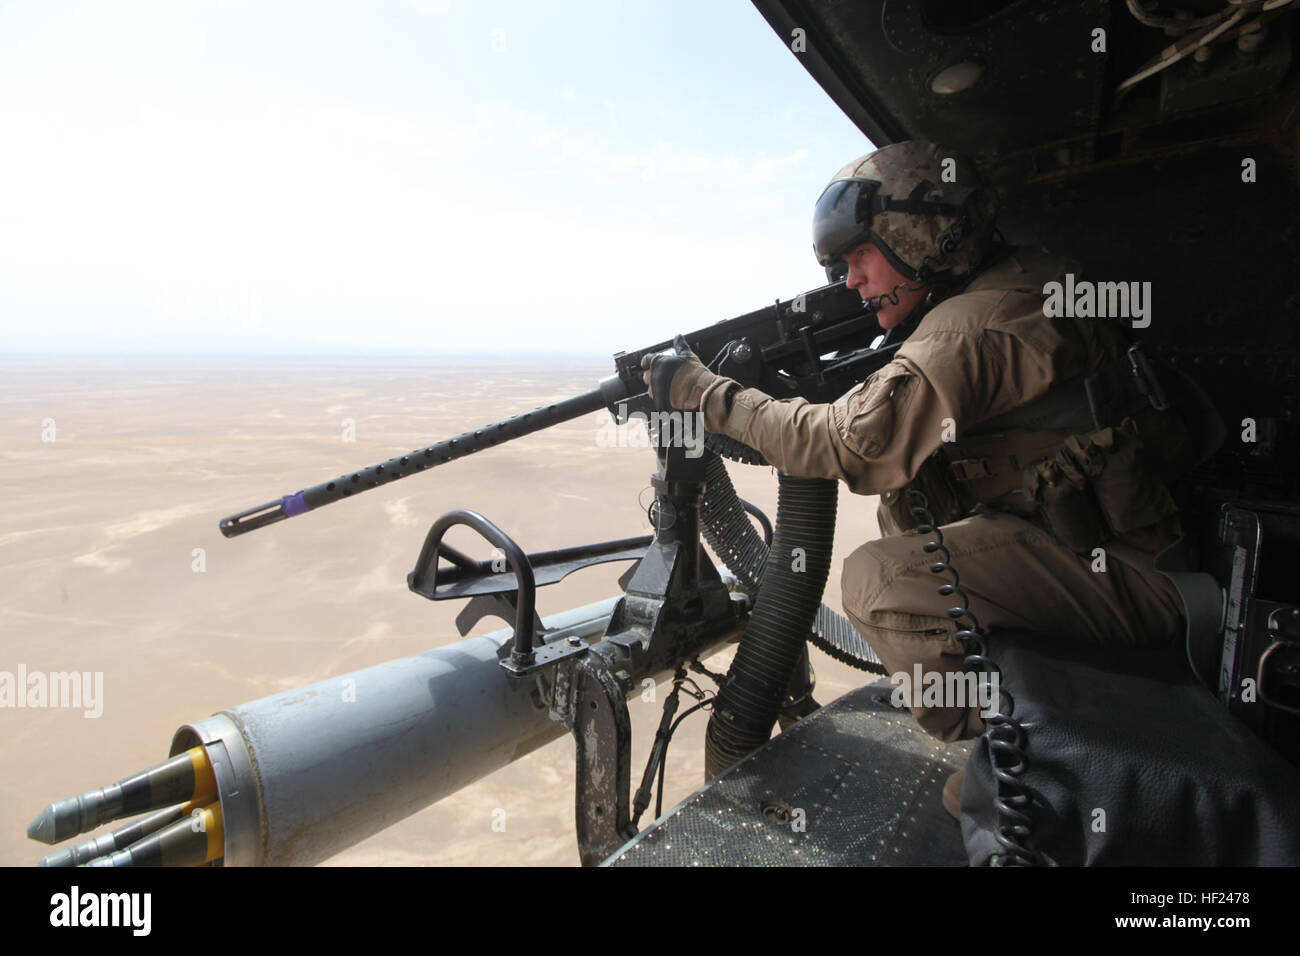 Corporal Andrew Harris, a UH-1Y Huey crew chief with Marine Light Attack Helicopter Squadron 369, and a Highland, Illinois, native, performs a weapons check before an aerial assault support mission for ground convoys in Helmand province, Afghanistan, May 3, 2014. Before the last Marines and sailors of Forward Operating Bases Nolay and Sabit Qadam convoyed out of northern Helmand to return to Camp Leatherneck for the final time, the “Gunfighters” of HMLA-369 and “Heavyweights” of Marine Heavy Helicopter Squadron 466 provided overwatch for returning vehicle convoys as well as retrograde support. Stock Photo